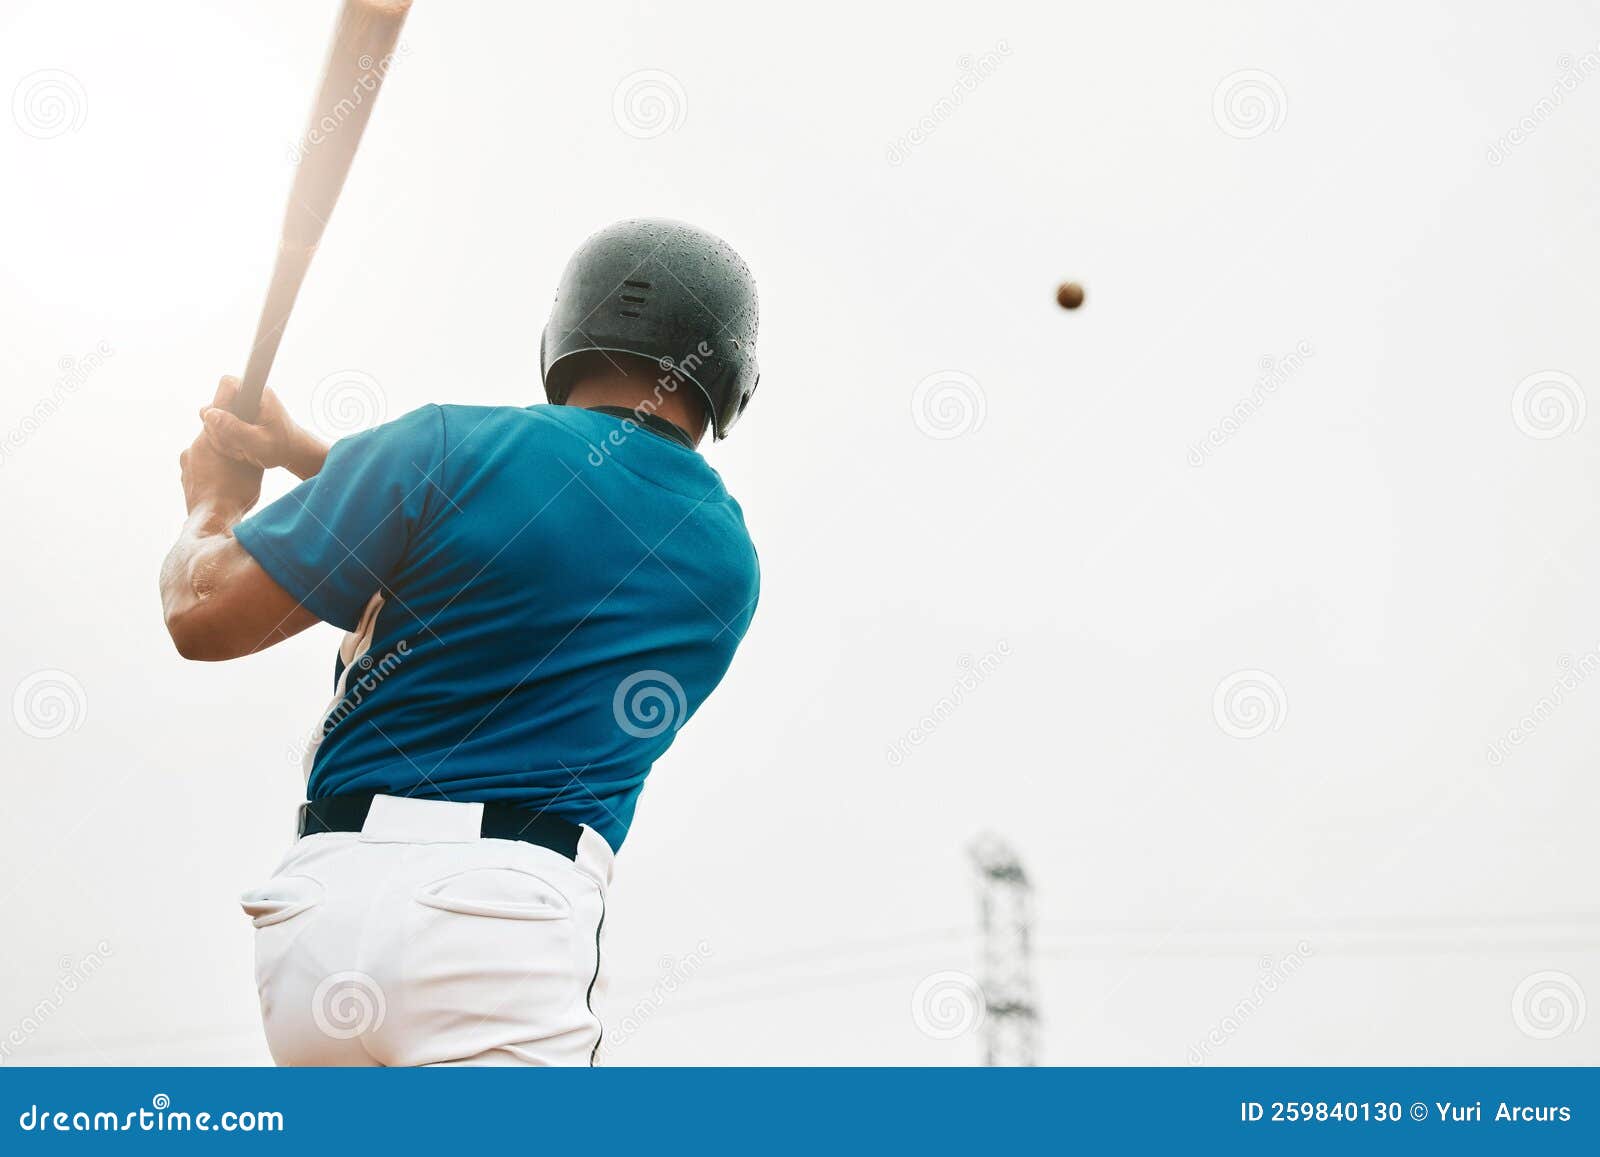 baseball player, bat and homerun with sky and baseball for sports, game or contest outdoor in summer. man, sport and hit